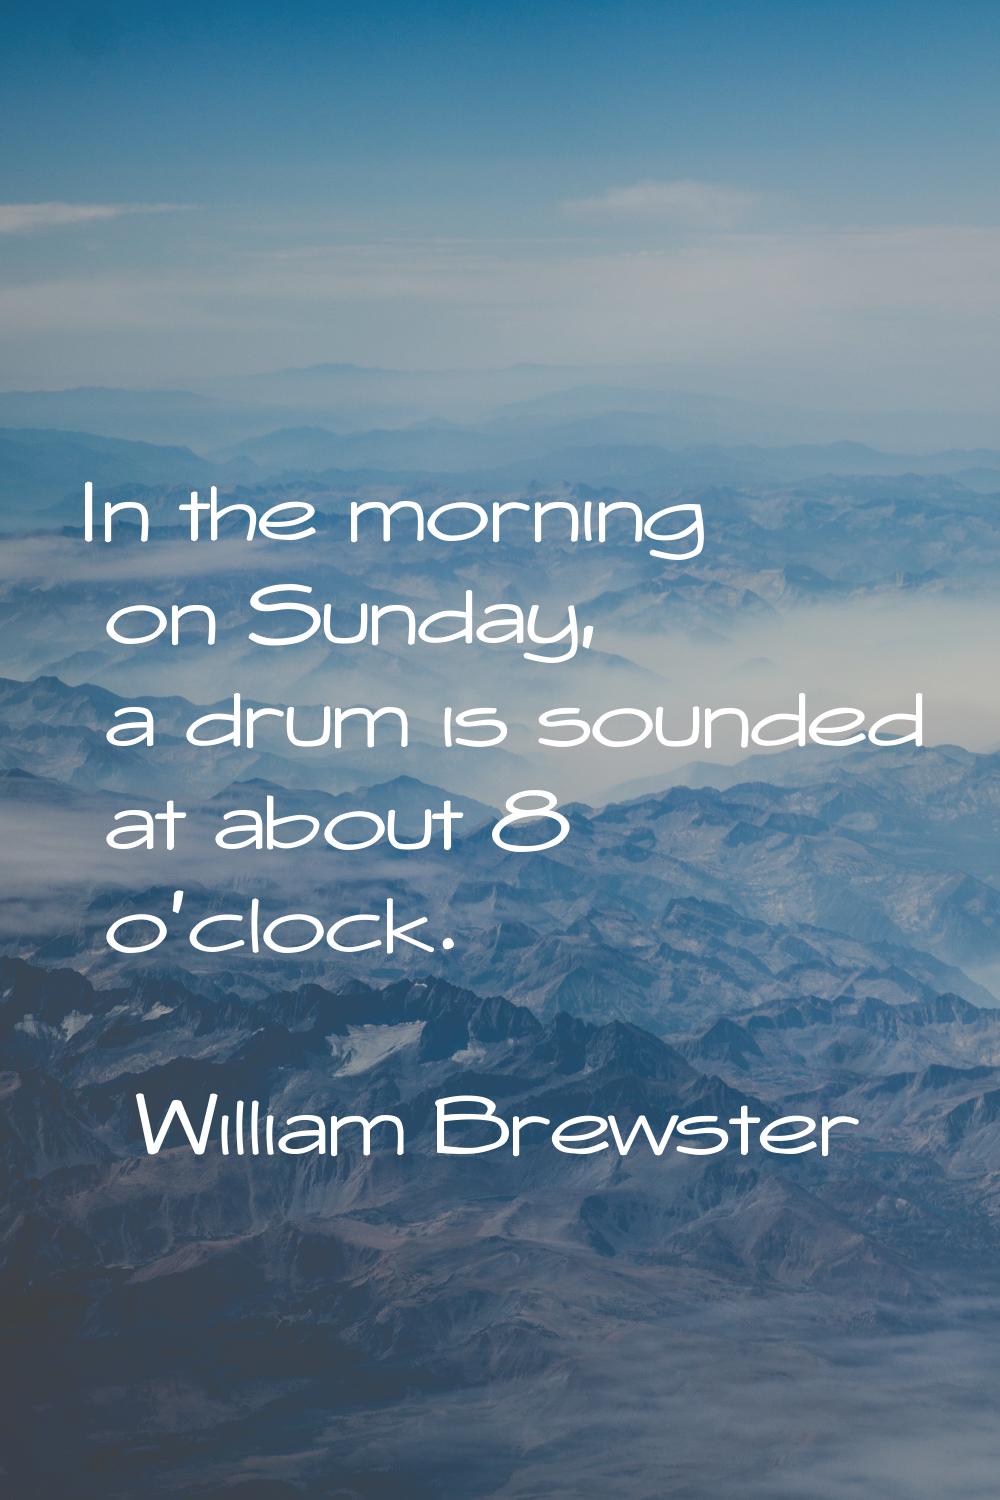 In the morning on Sunday, a drum is sounded at about 8 o'clock.